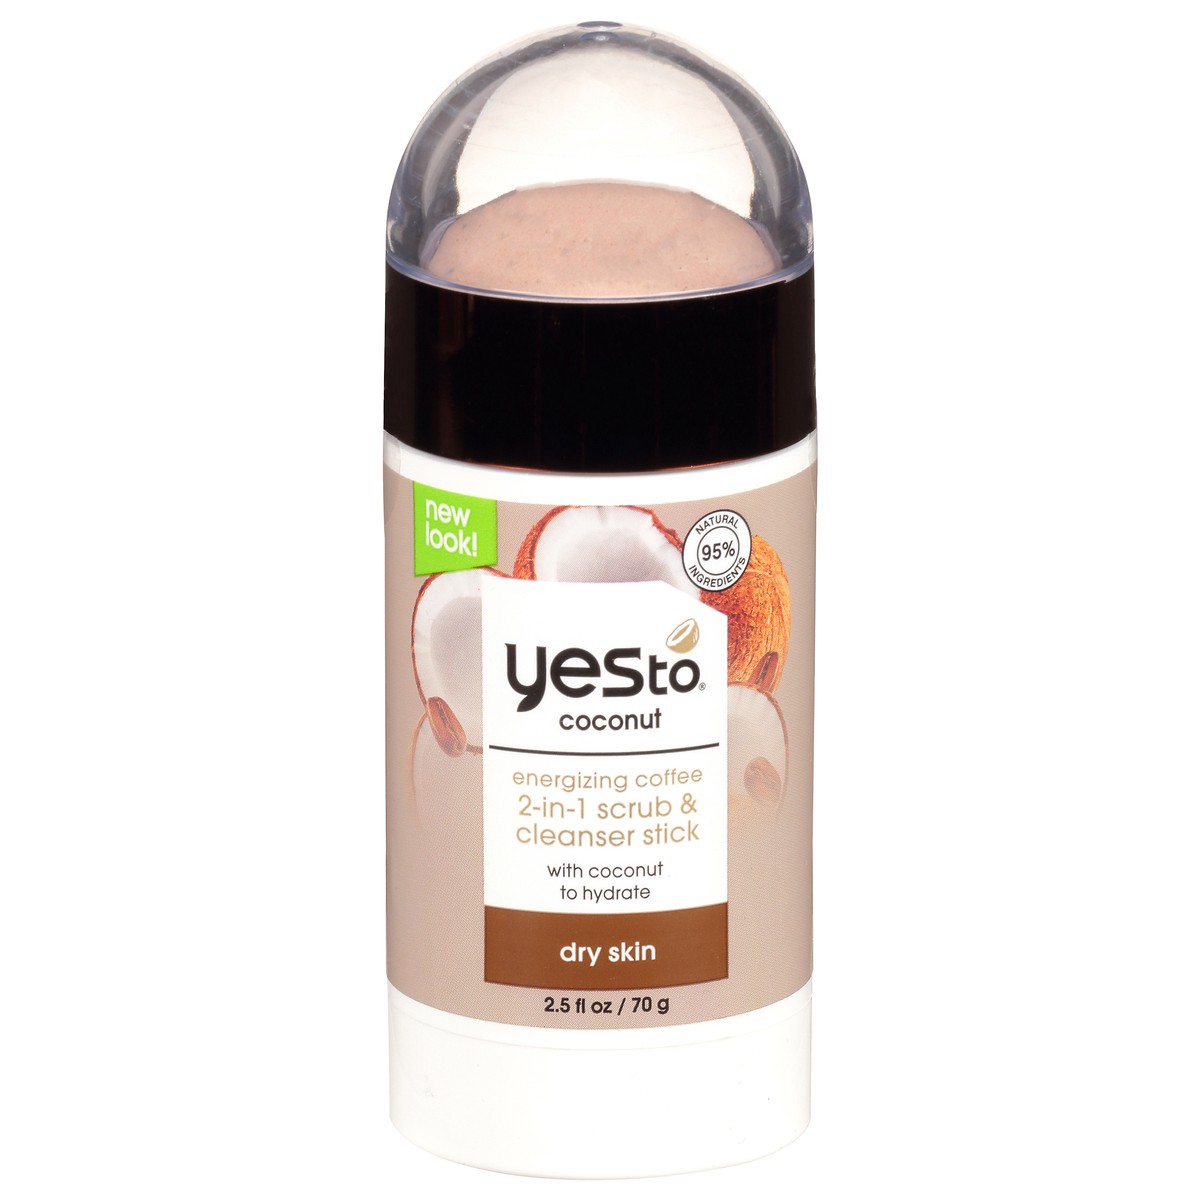 slide 1 of 11, Yes to Coconut Energizing Coffee 2-in-1 Dry Skin crub & Cleanser Stick 2.5 oz, 1 ct